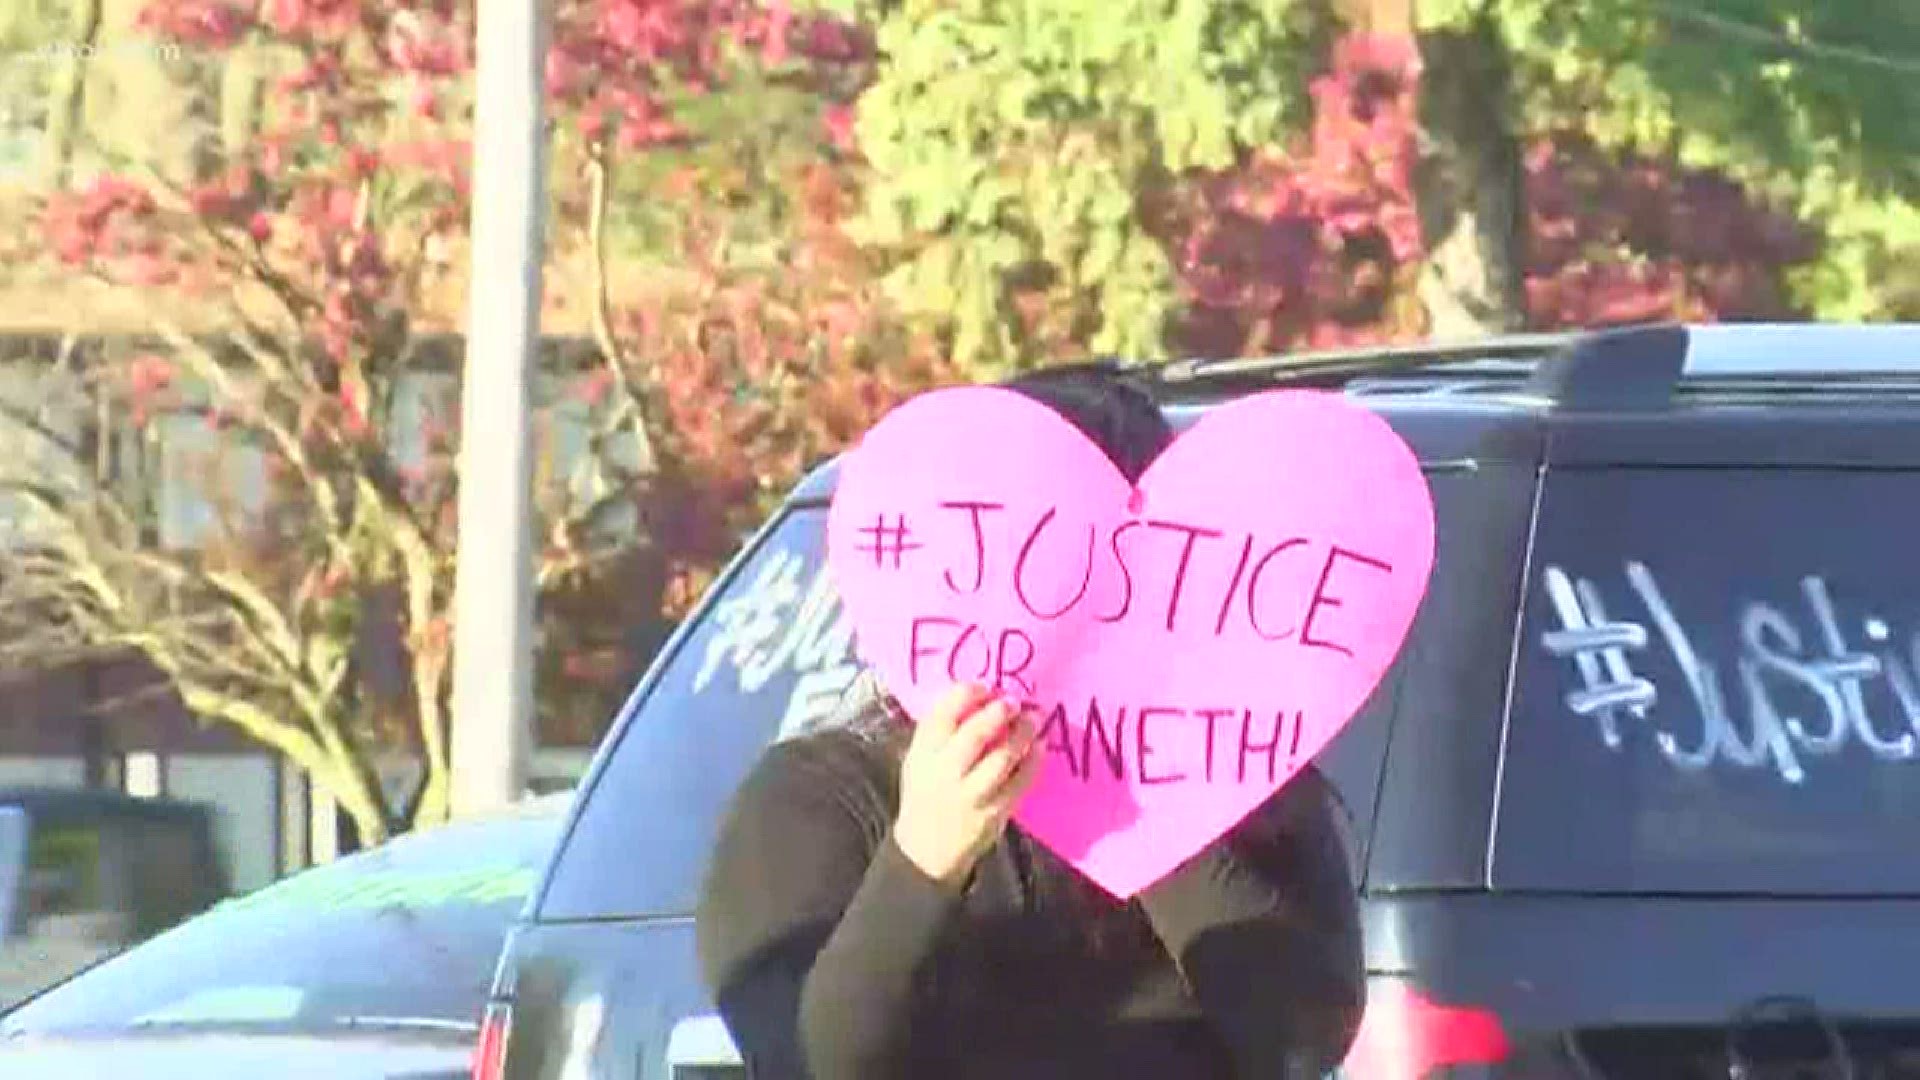 A "Ride for Justice" was organized for Emilia Janeth Silguero Guerrero, who was killed in her own home back in August.